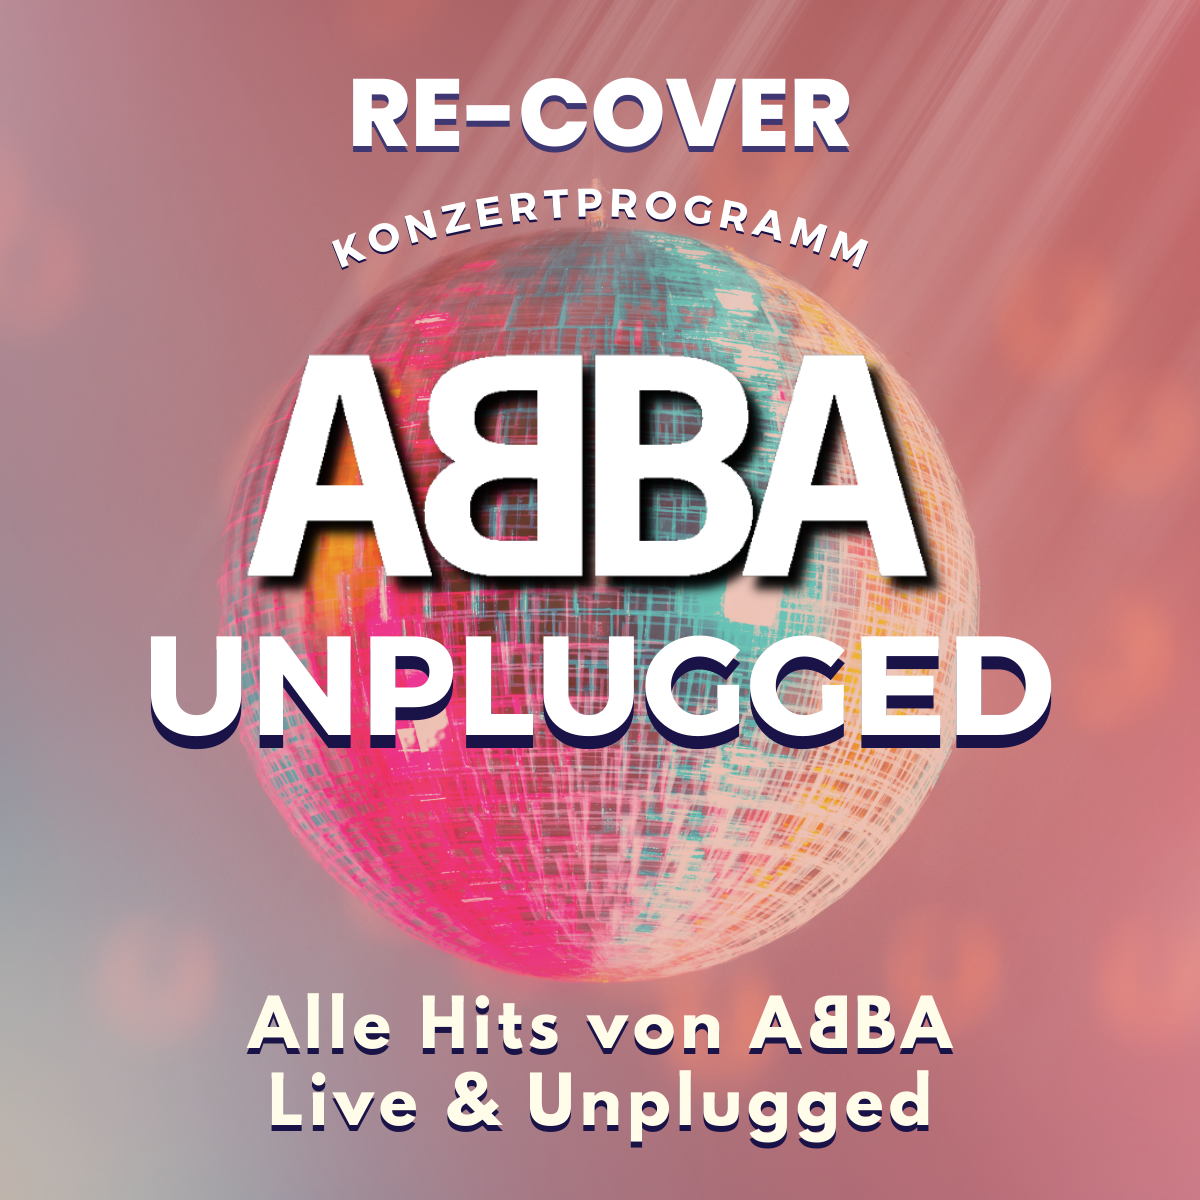 RE-COVER mit ABBA unplugged